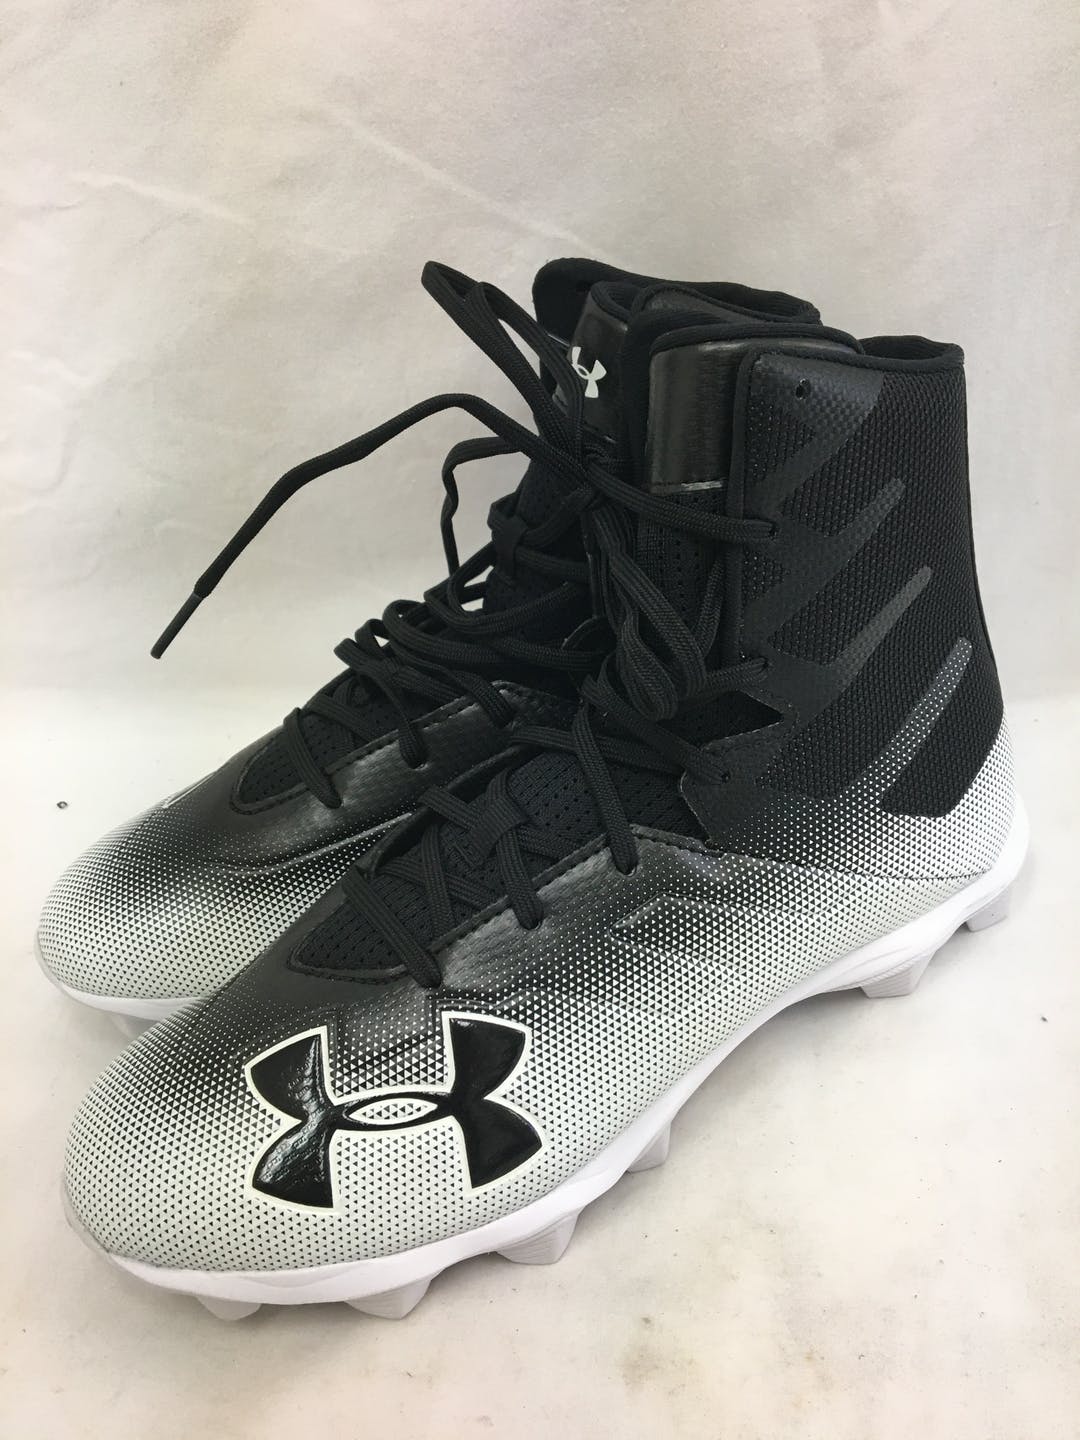 Under Armour  Mens UA Highlight RM Lacrosse Football Cleats Shoes 3000183-001 